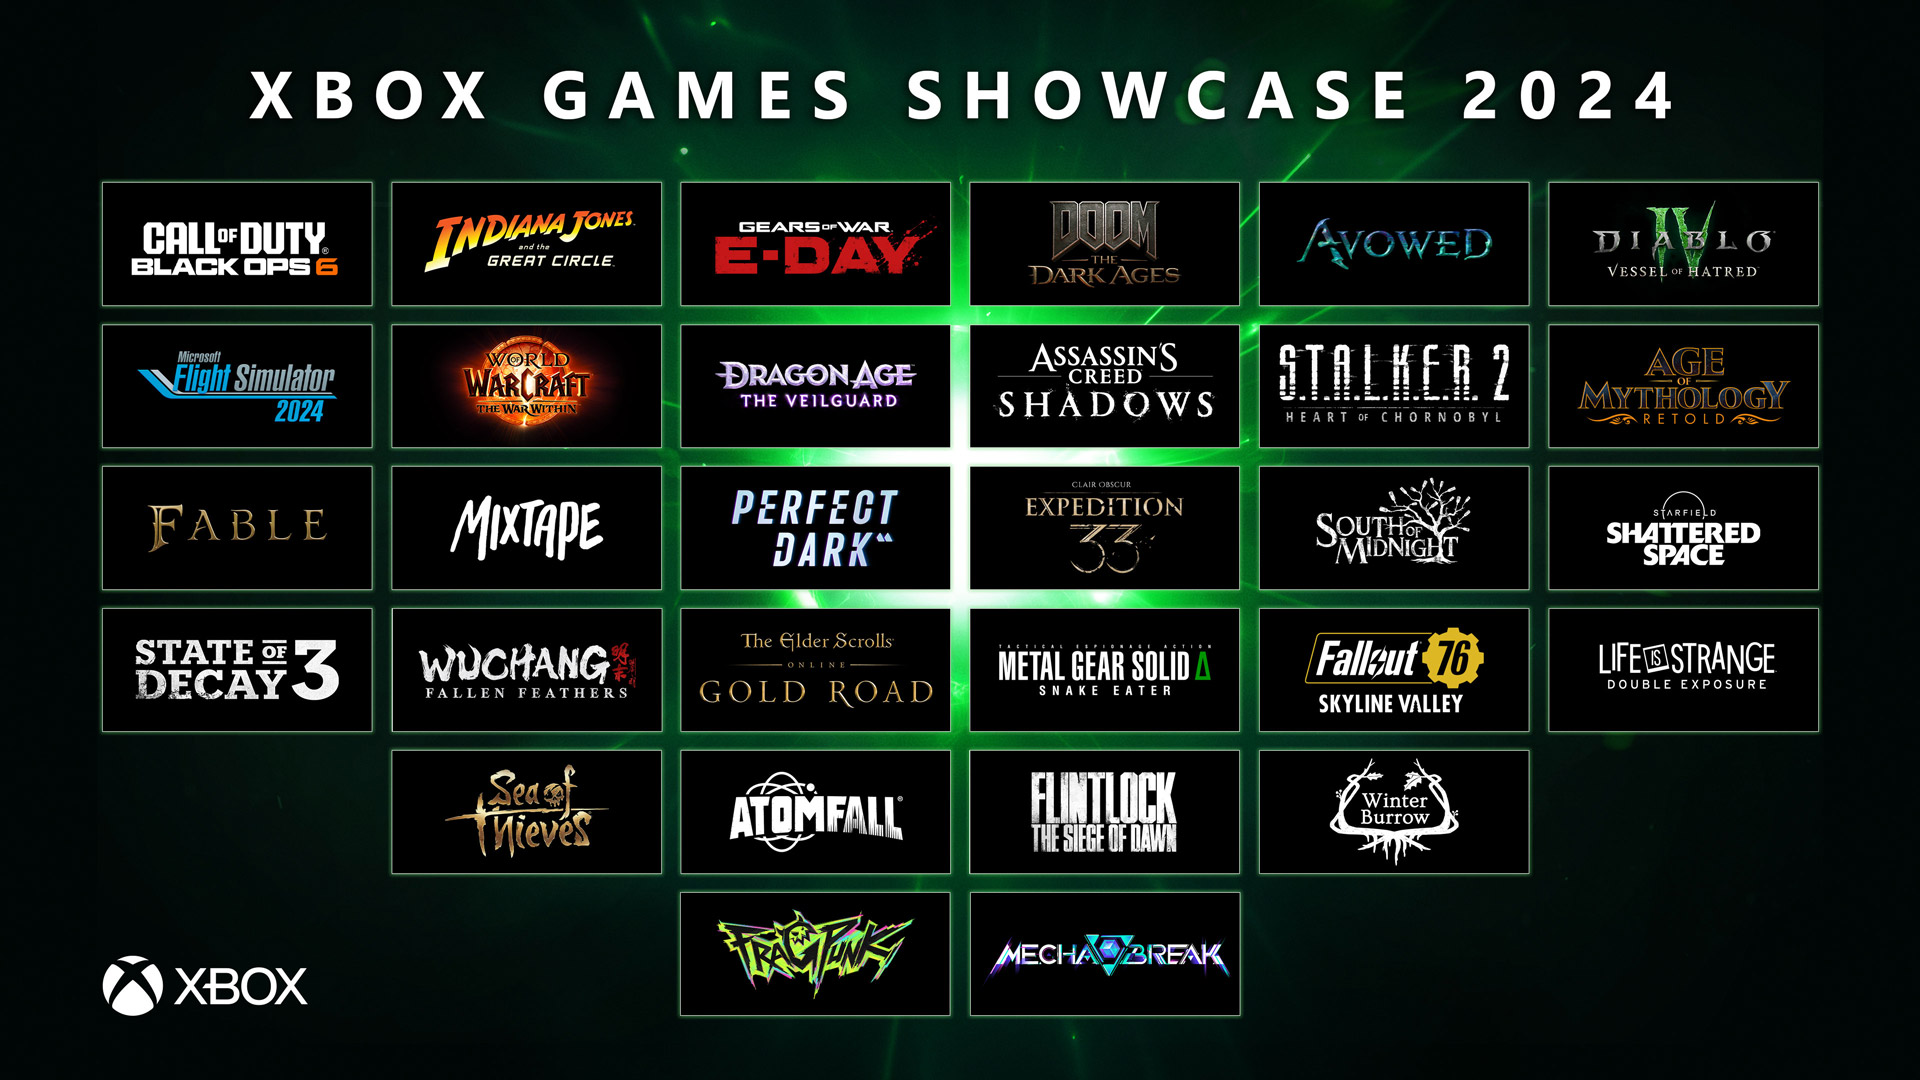 Xbox Games Showcase 2024 Avowed, Dragon Age, Fable and more